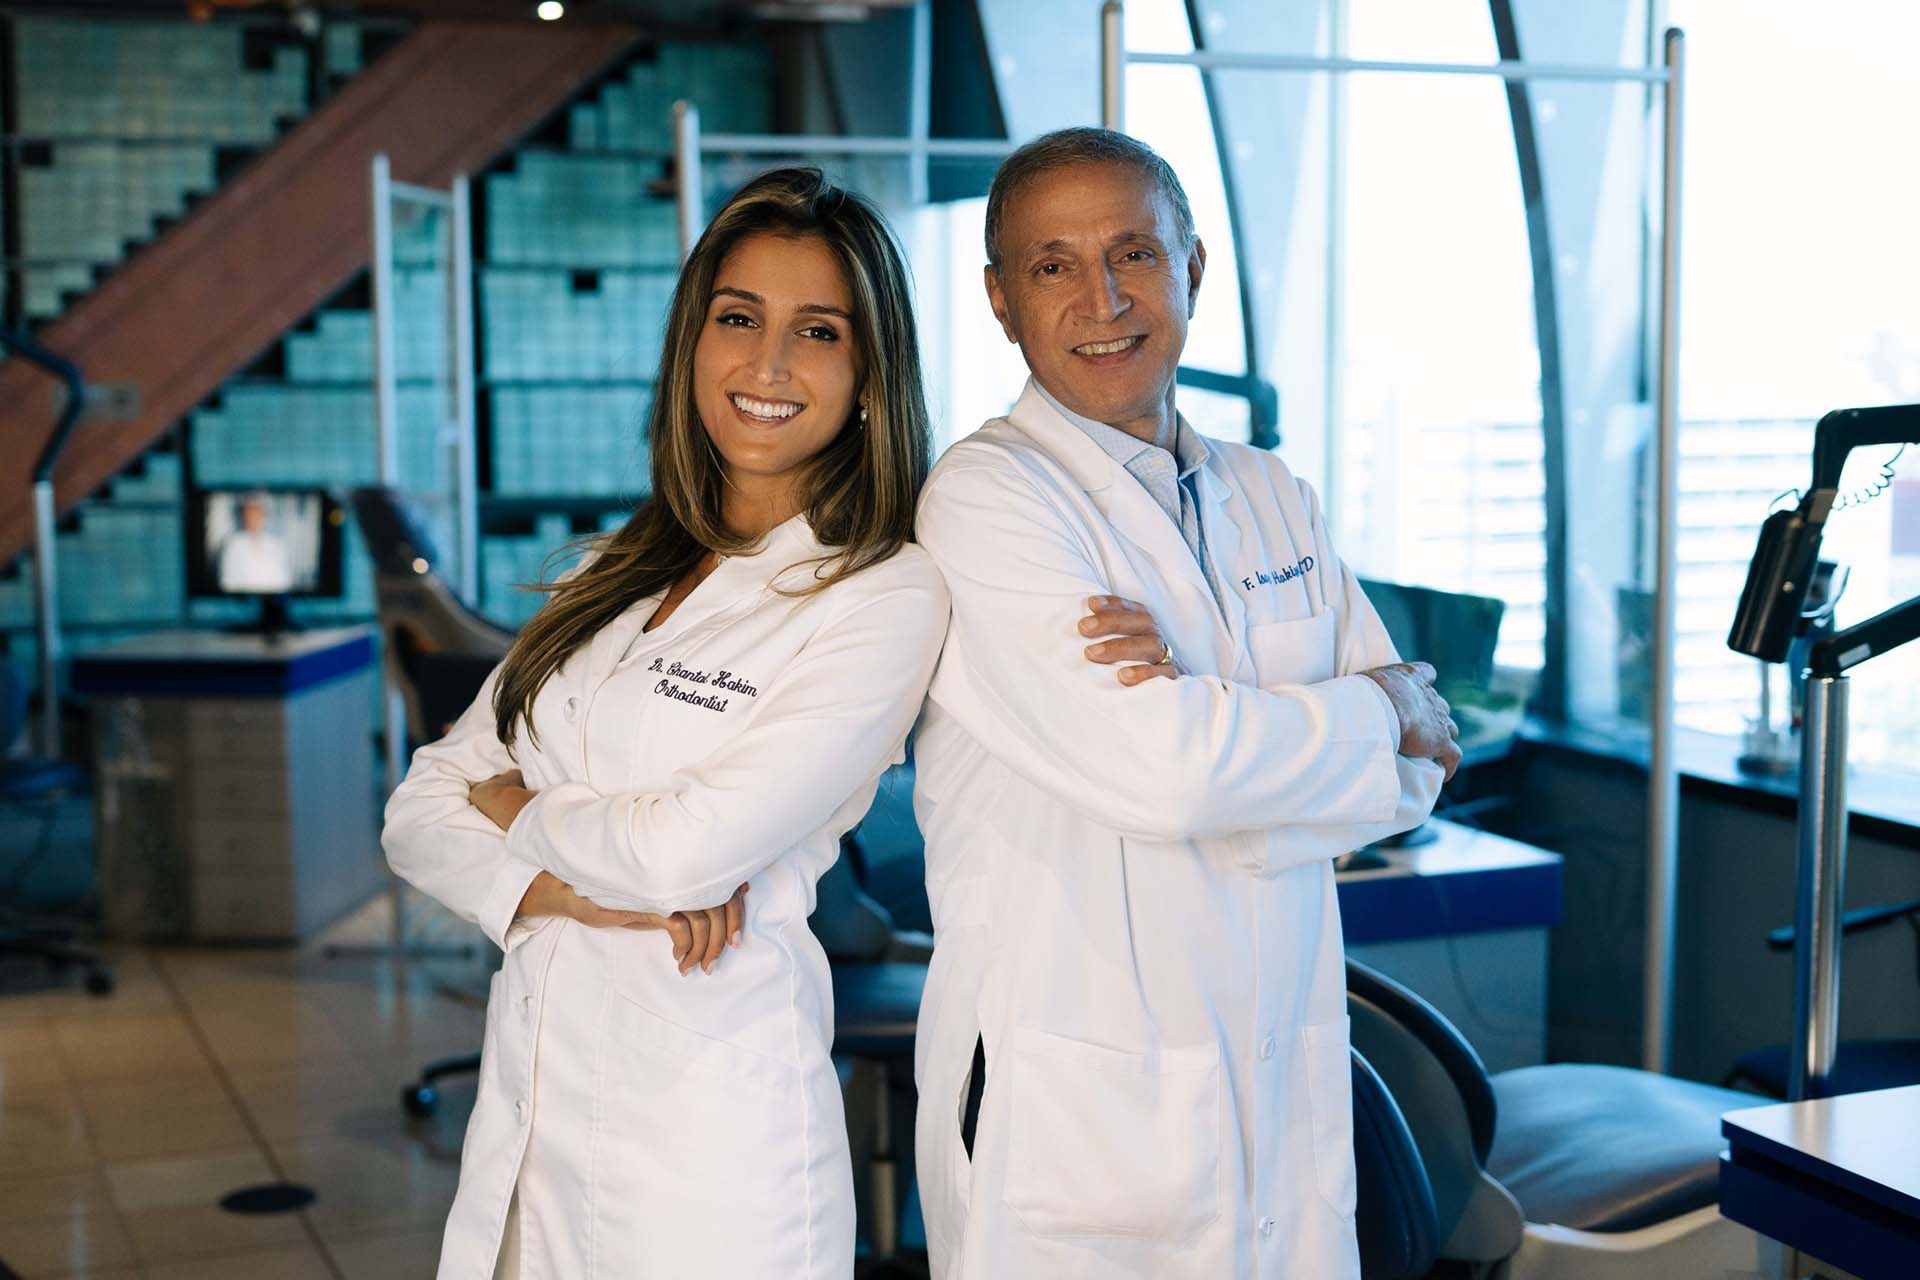 Dr. Chantal Hakim and Dr. F. Isaac Hakim at the Orthospaceship in Los Angeles, a Southern California orthodontic practice serving Hollywood, Los Angeles.